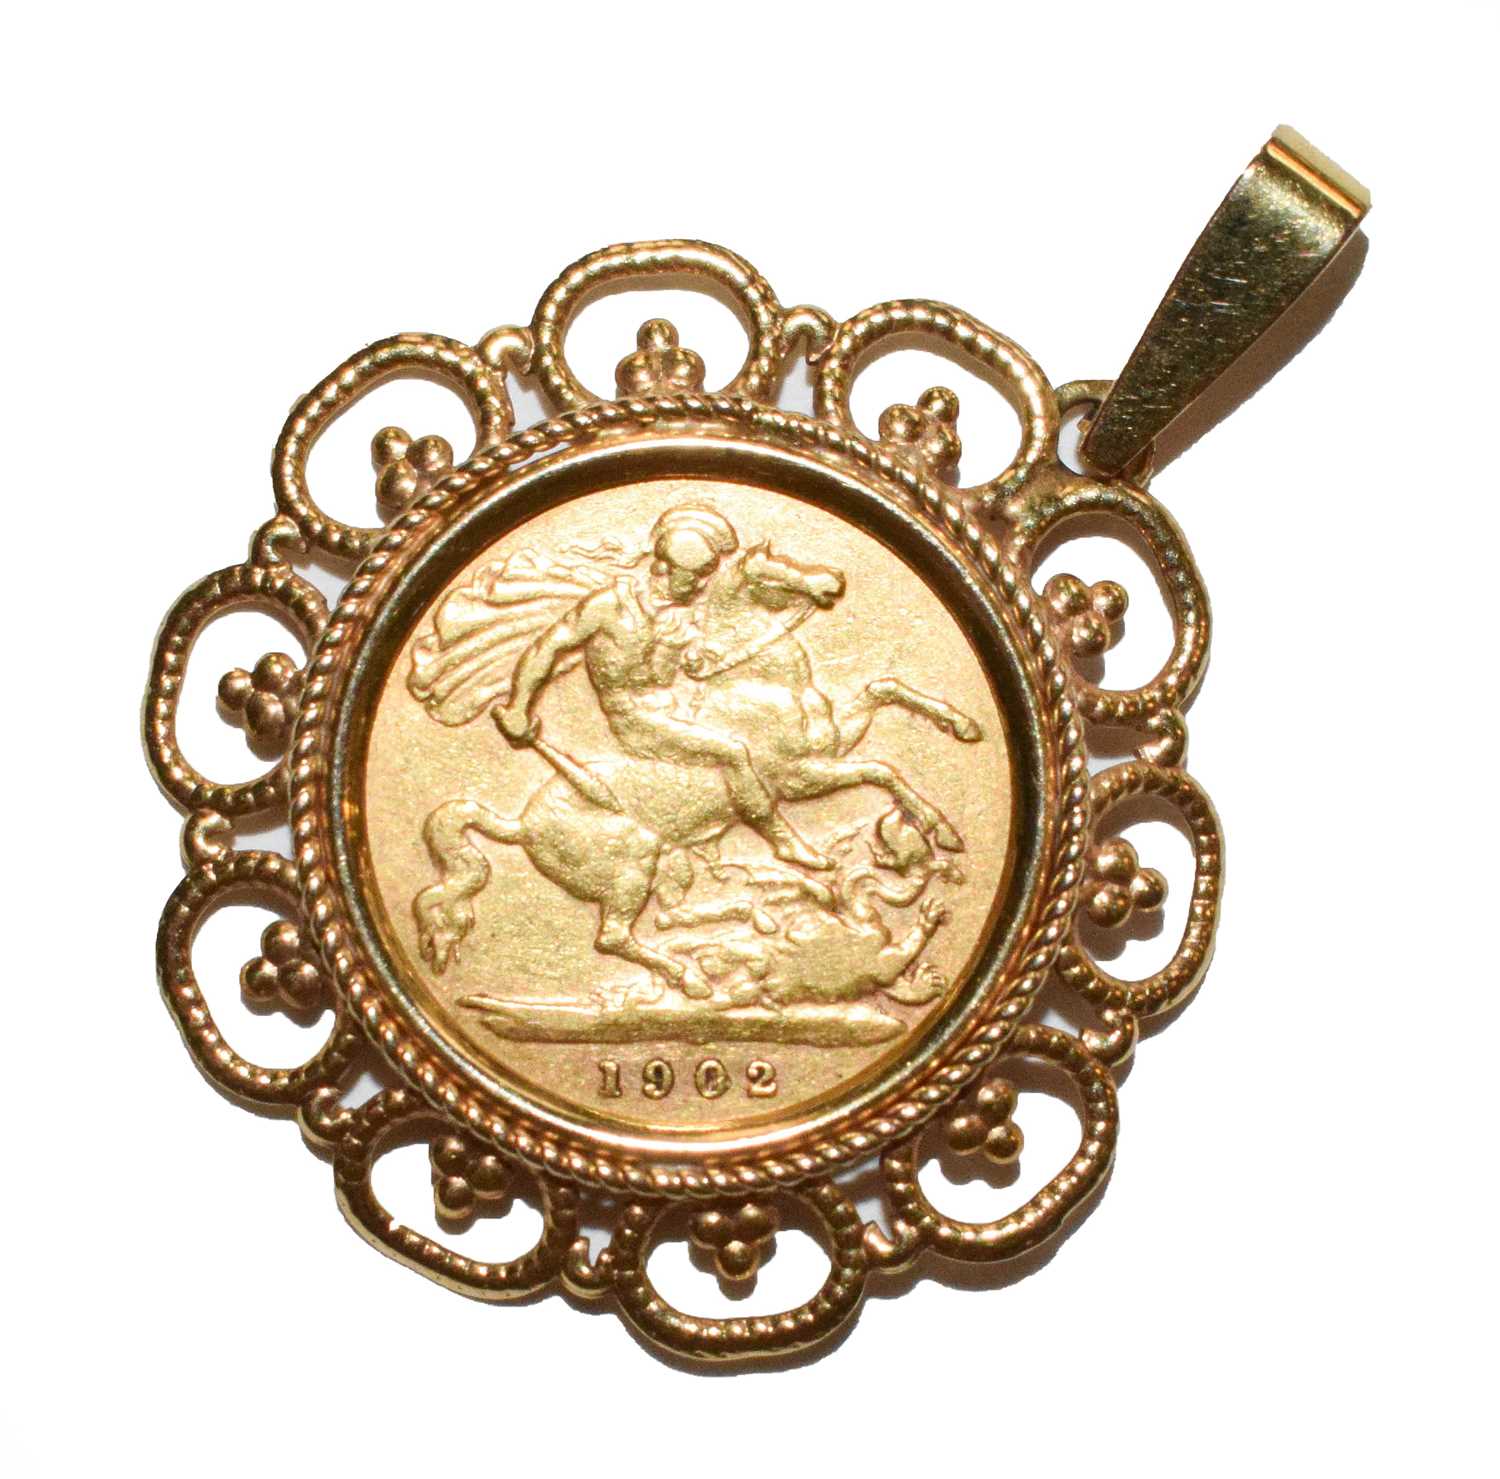 Lot 79 - A half sovereign dated 1902 mounted as a pendant